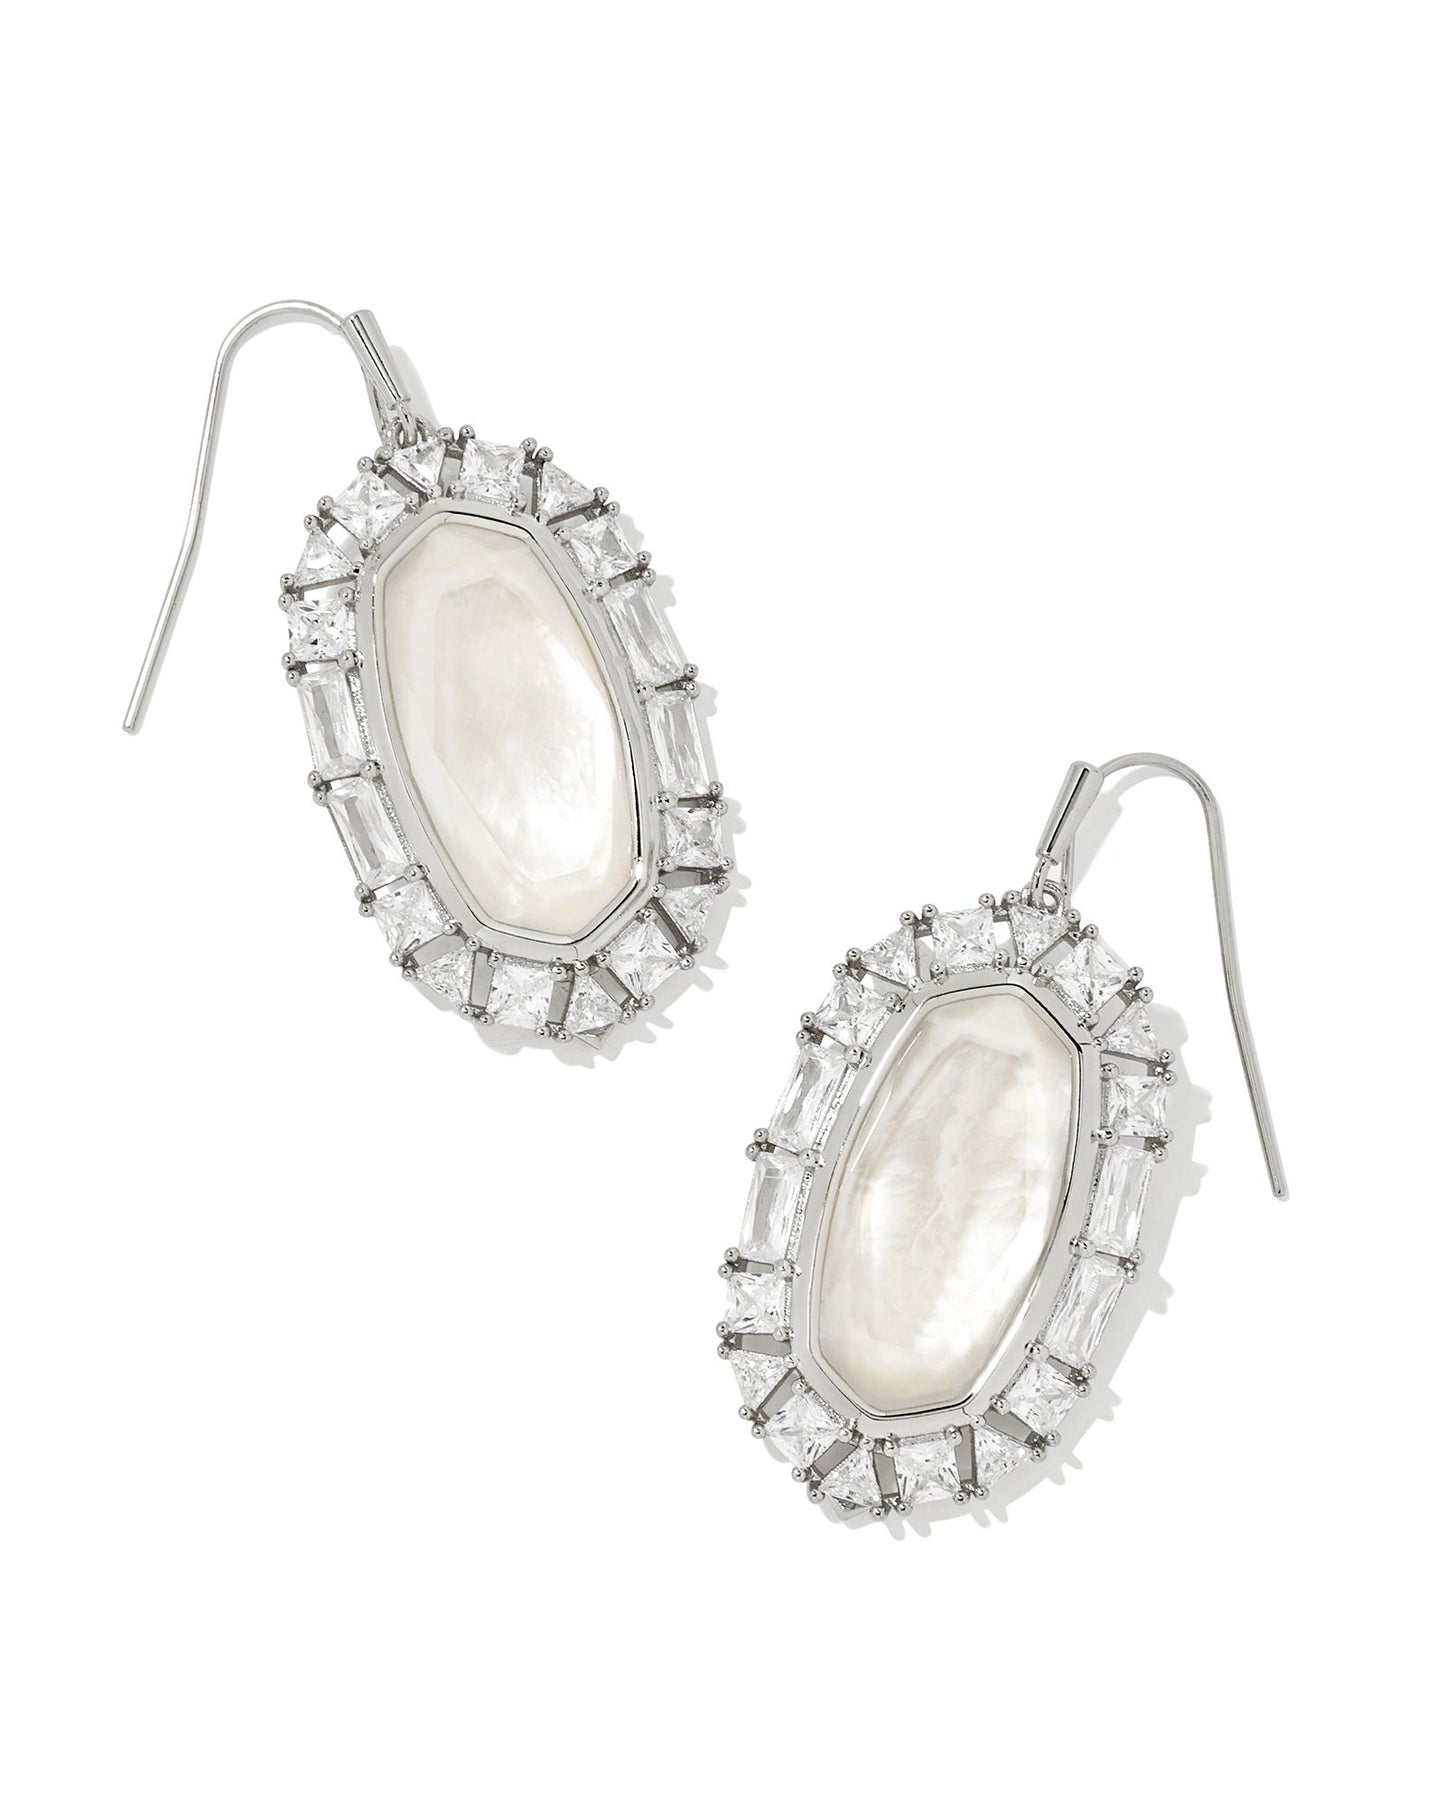 Our iconic statement earrings get a luxurious crystal frame in the Elle Gold Crystal Frame Drop Earrings. Featuring baguette, trillion, and princess cut crystals, these earrings give off an oh-so-glamorous sparkle with every turn of your head. rhodium ivory mother of pearl